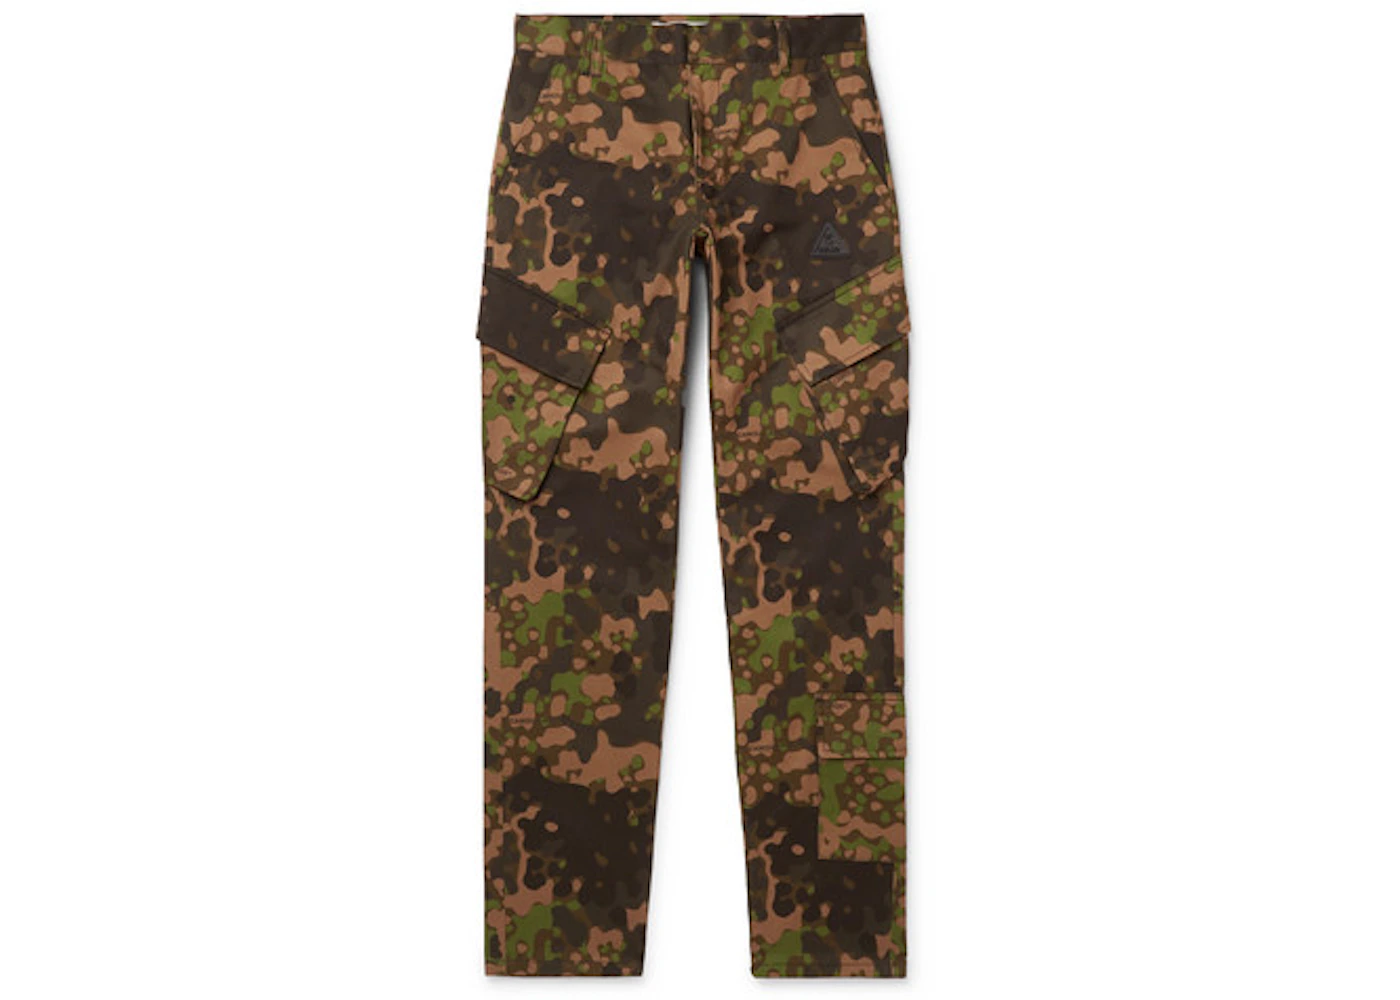 OFF-WHITE Slim Fit Camouflage Print Cargo Pants Camo Men's - SS19 - US